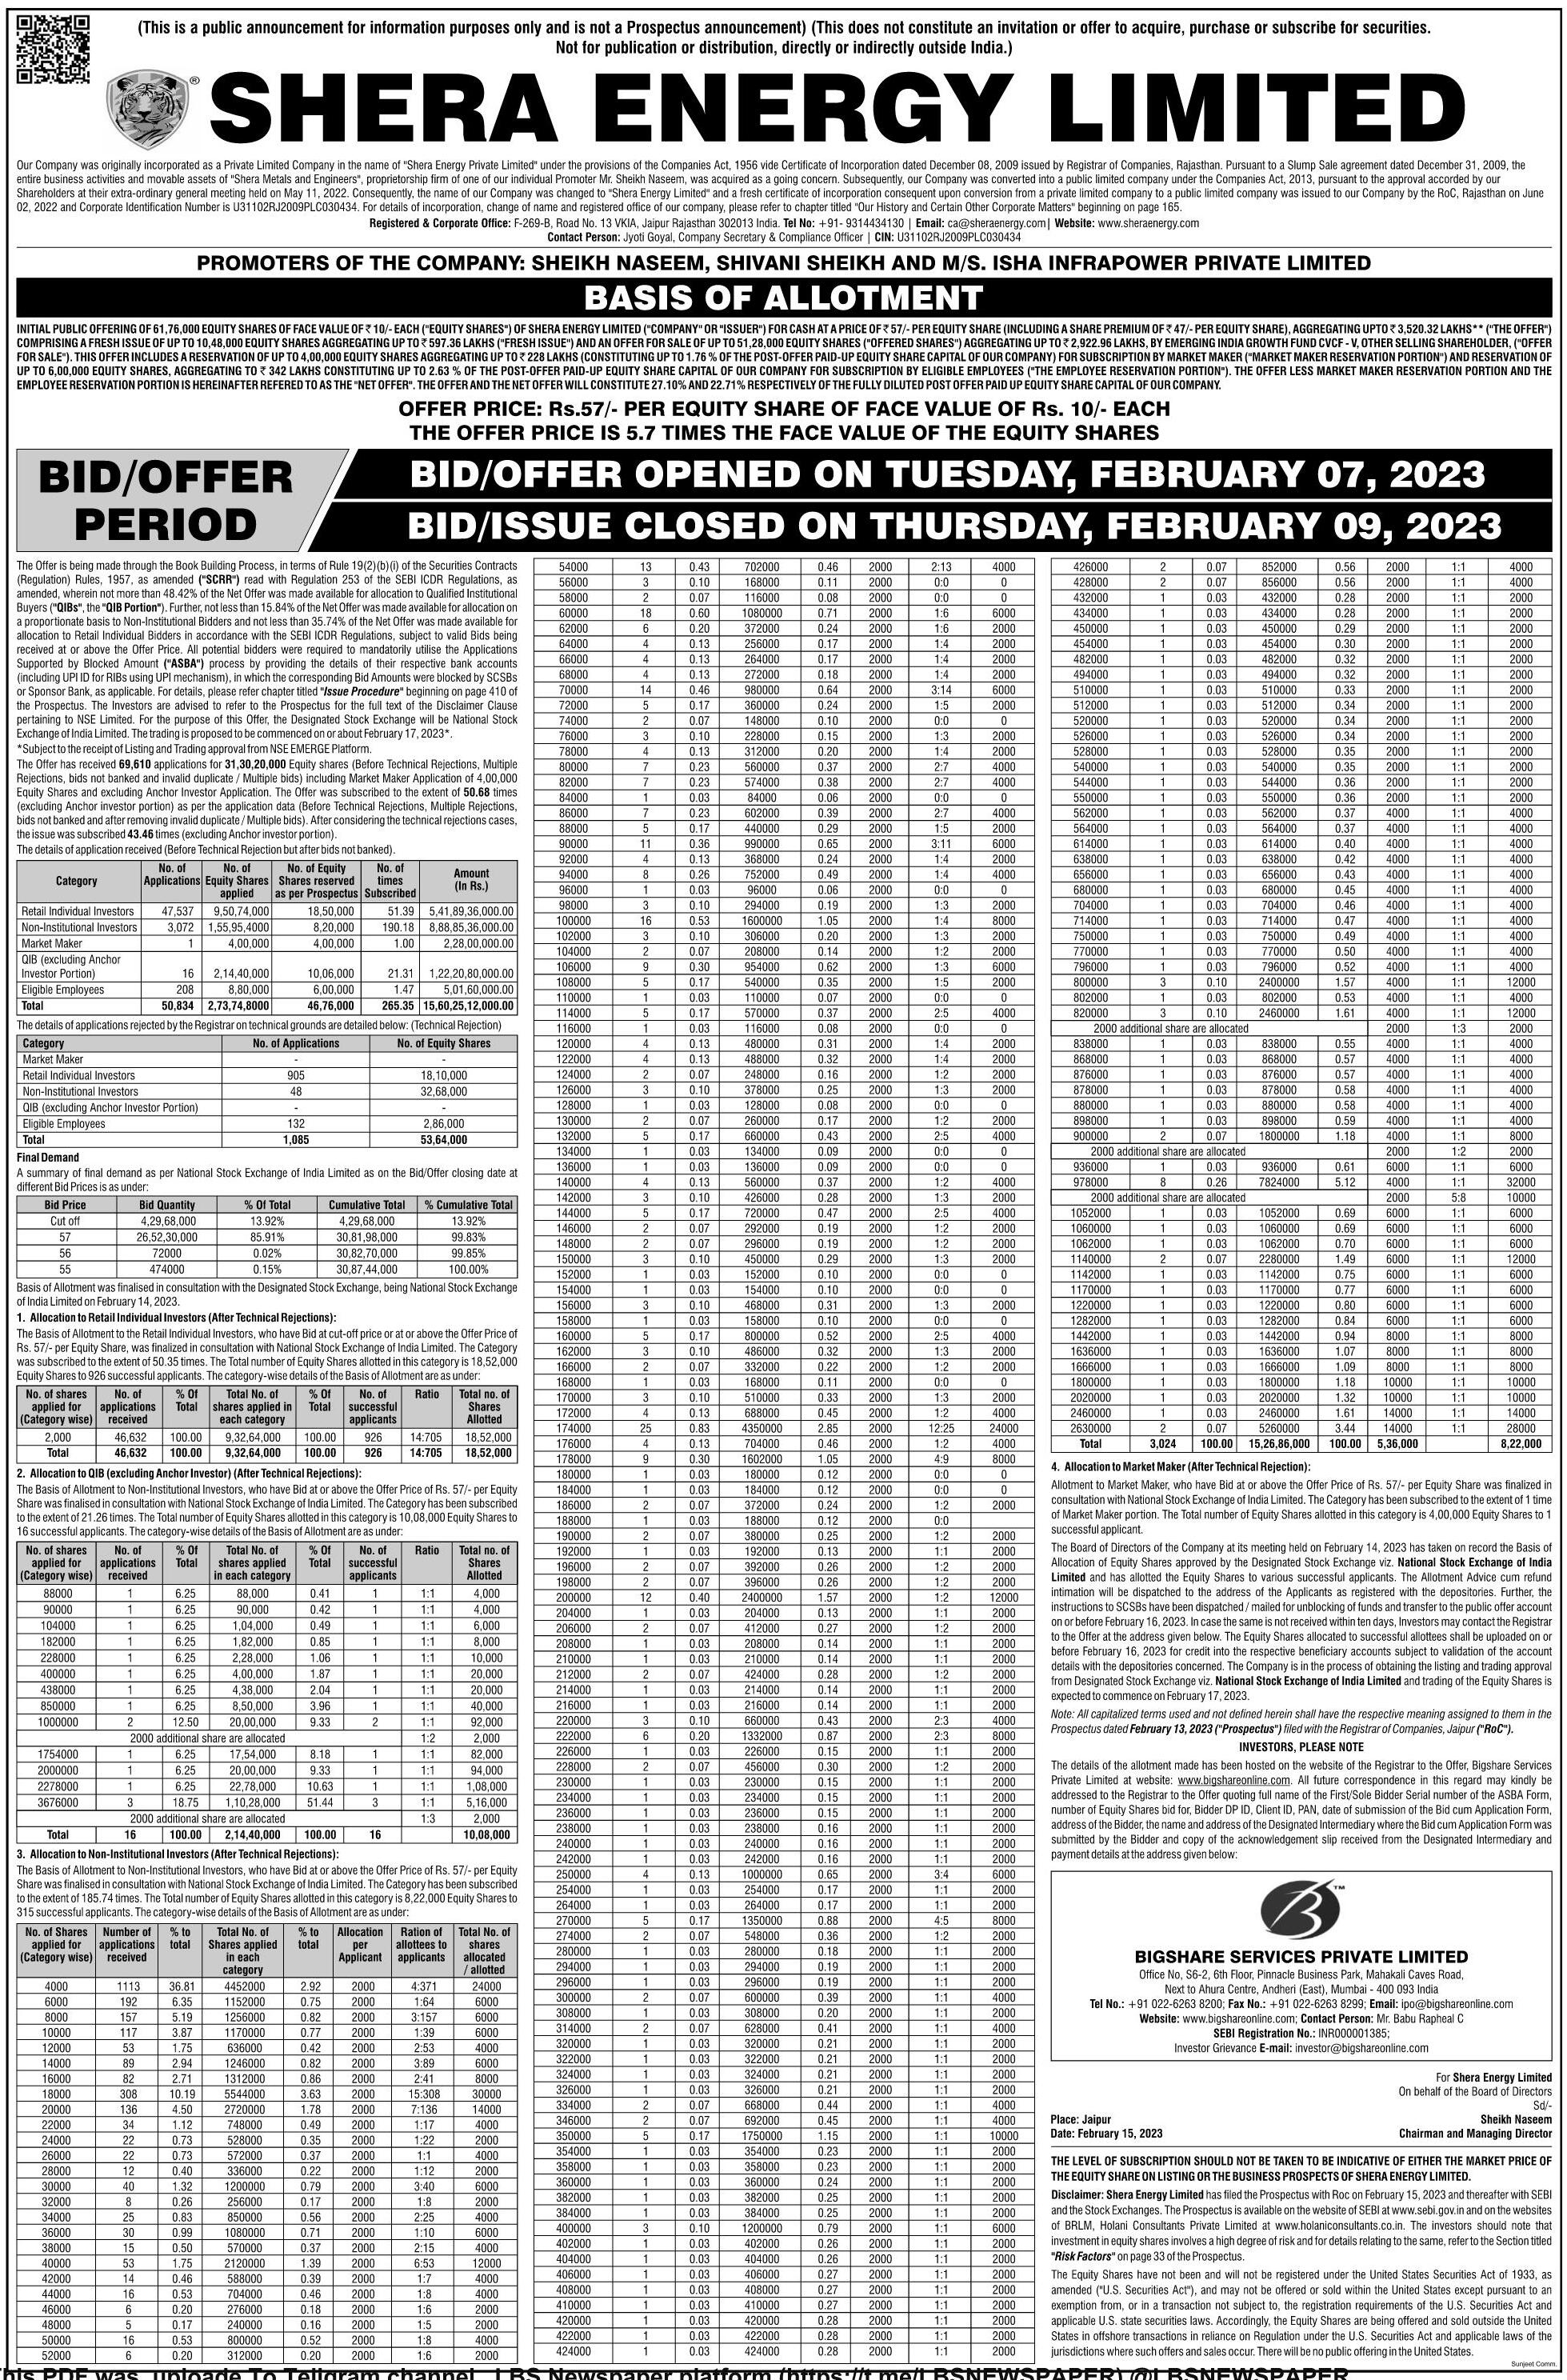 Shera Energy Limited IPO Basis of Allotment